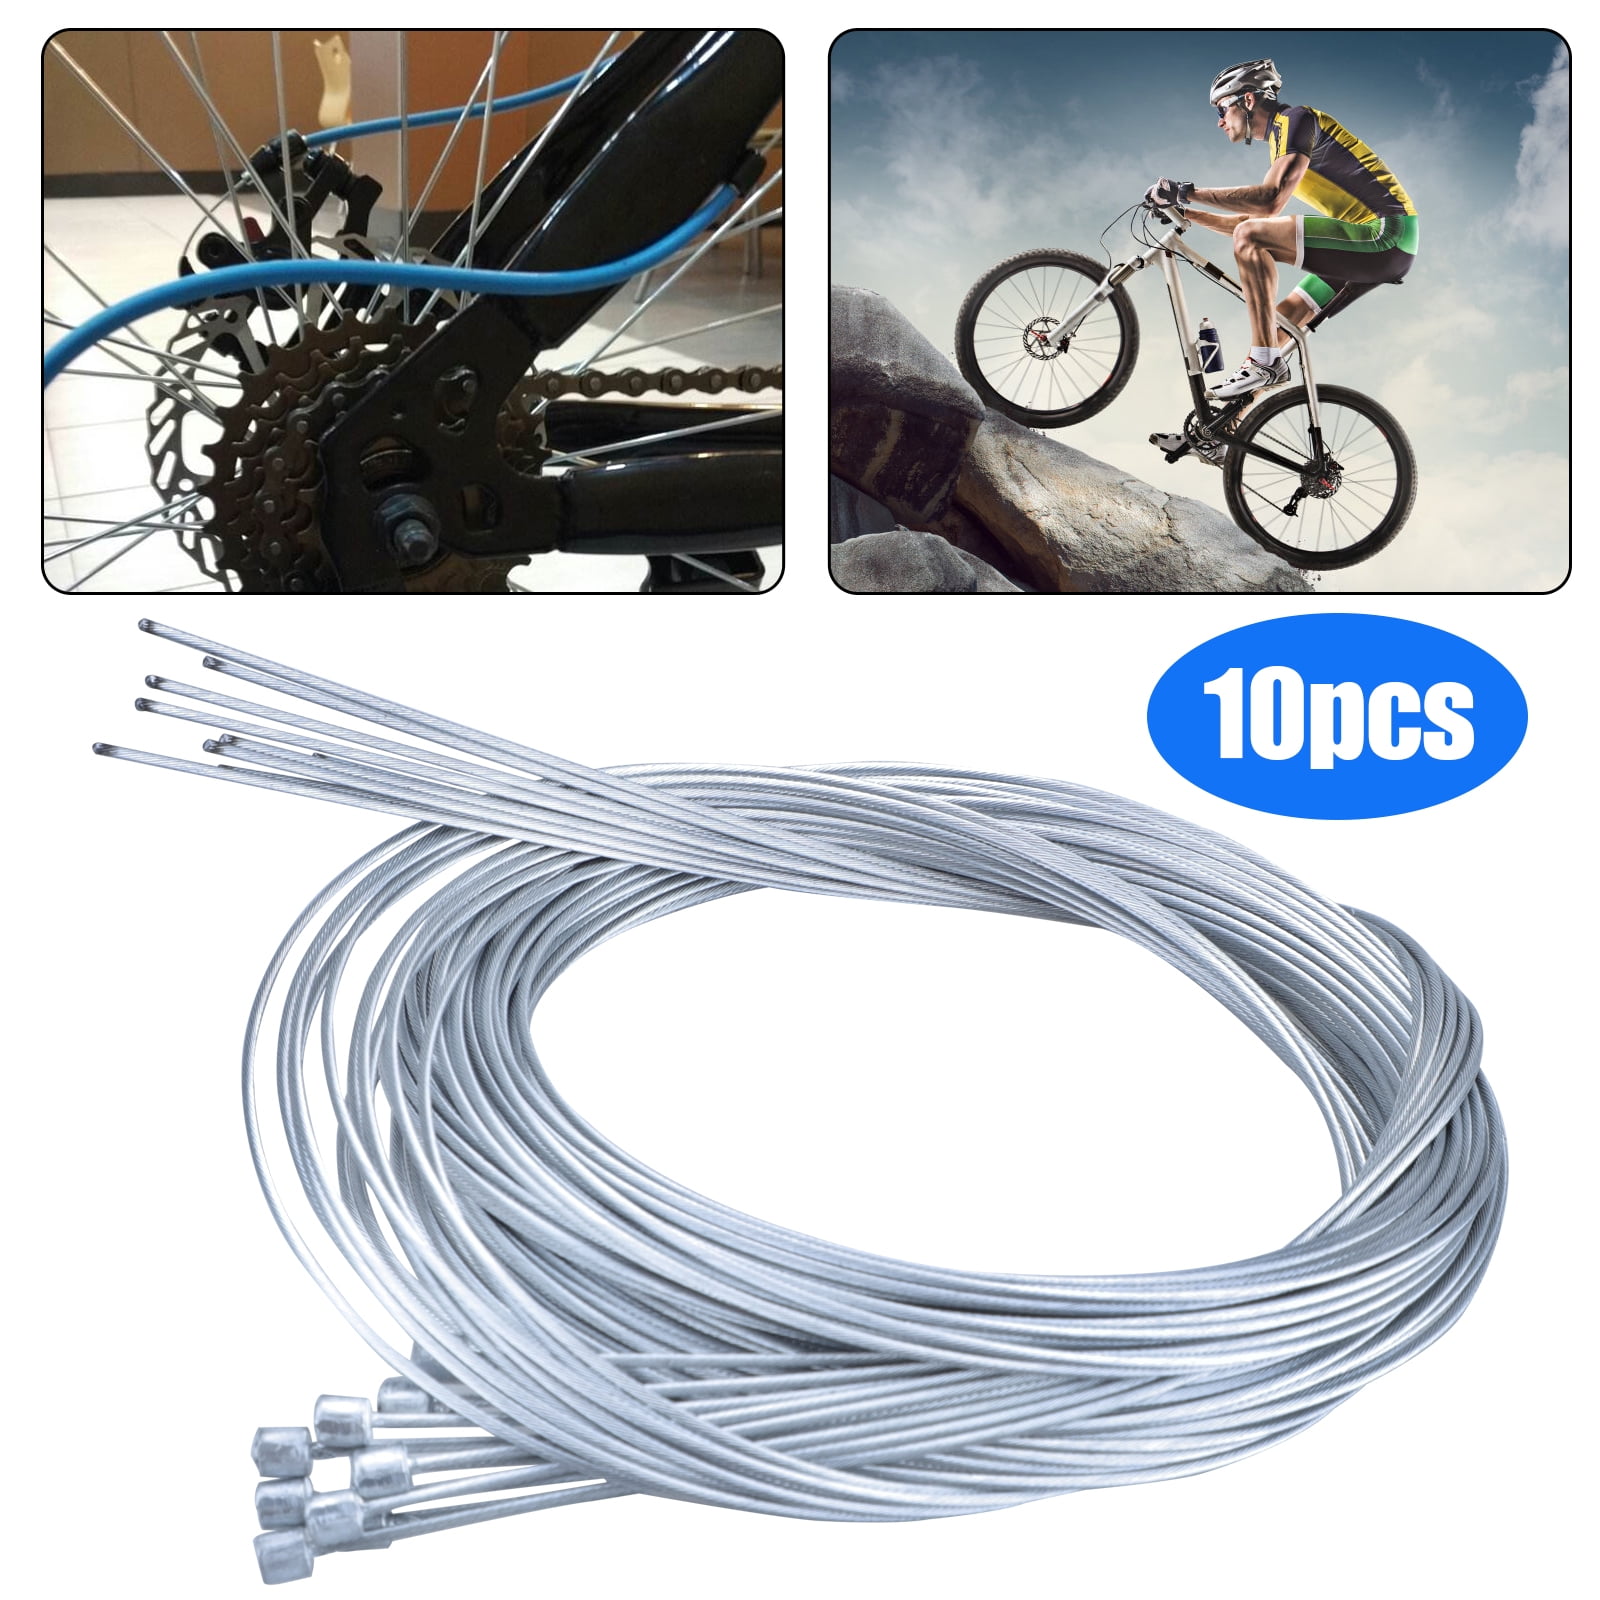 Universal Bicycle Transmission Line Bicycle Shift Derailleur Cable and Brake Cable Kit for MTB/Road Bike